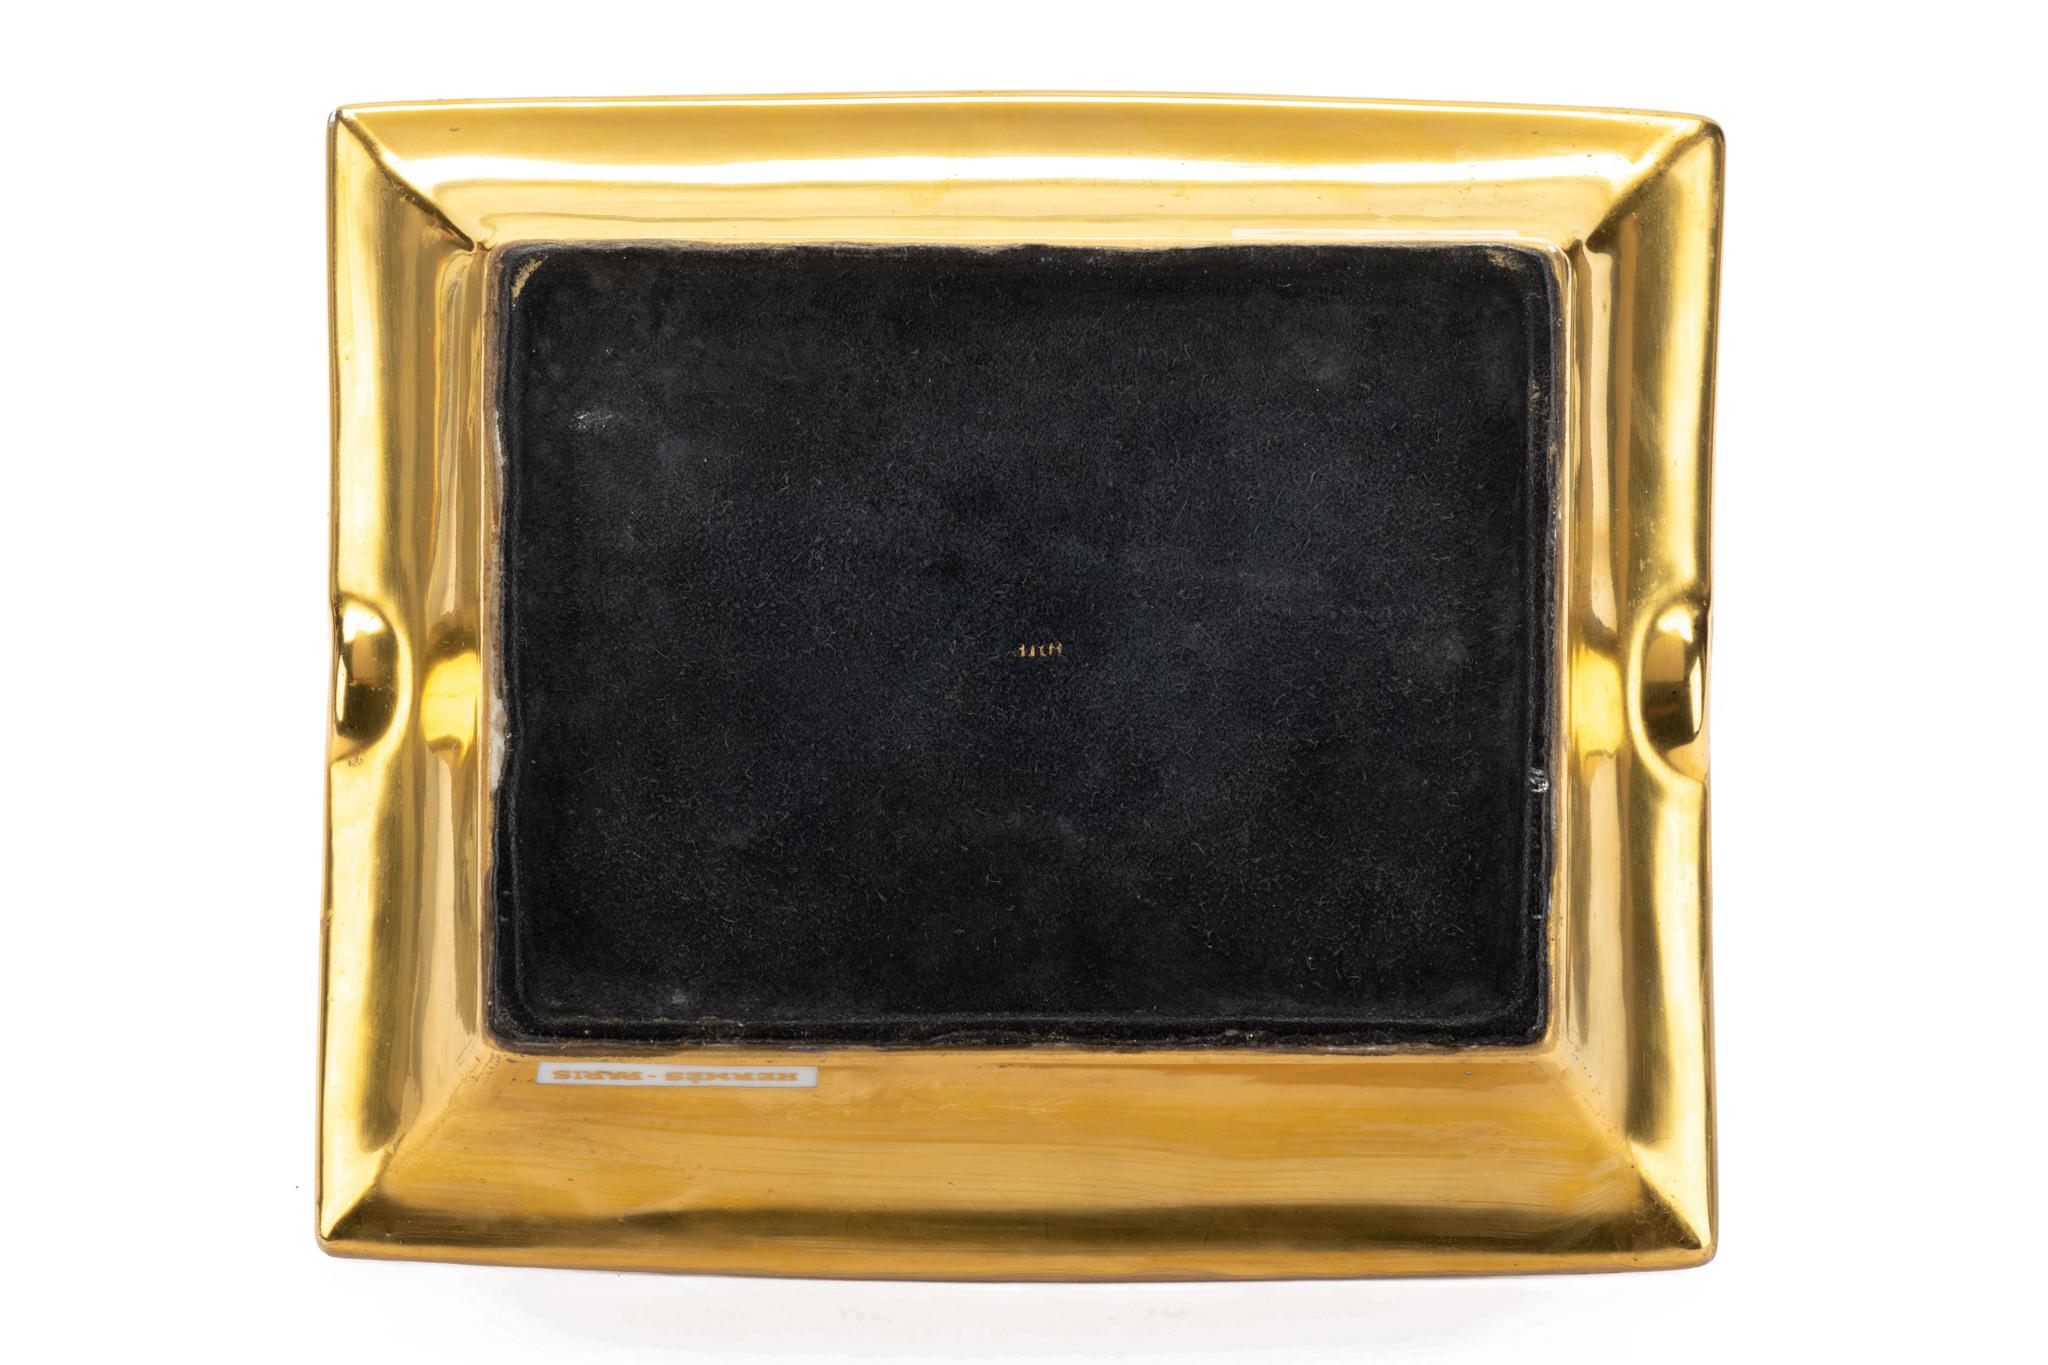 Hermes signature ashtray with samurai design in blue and gold. Suede stamped bottom. Minor wear on it. Made in France.